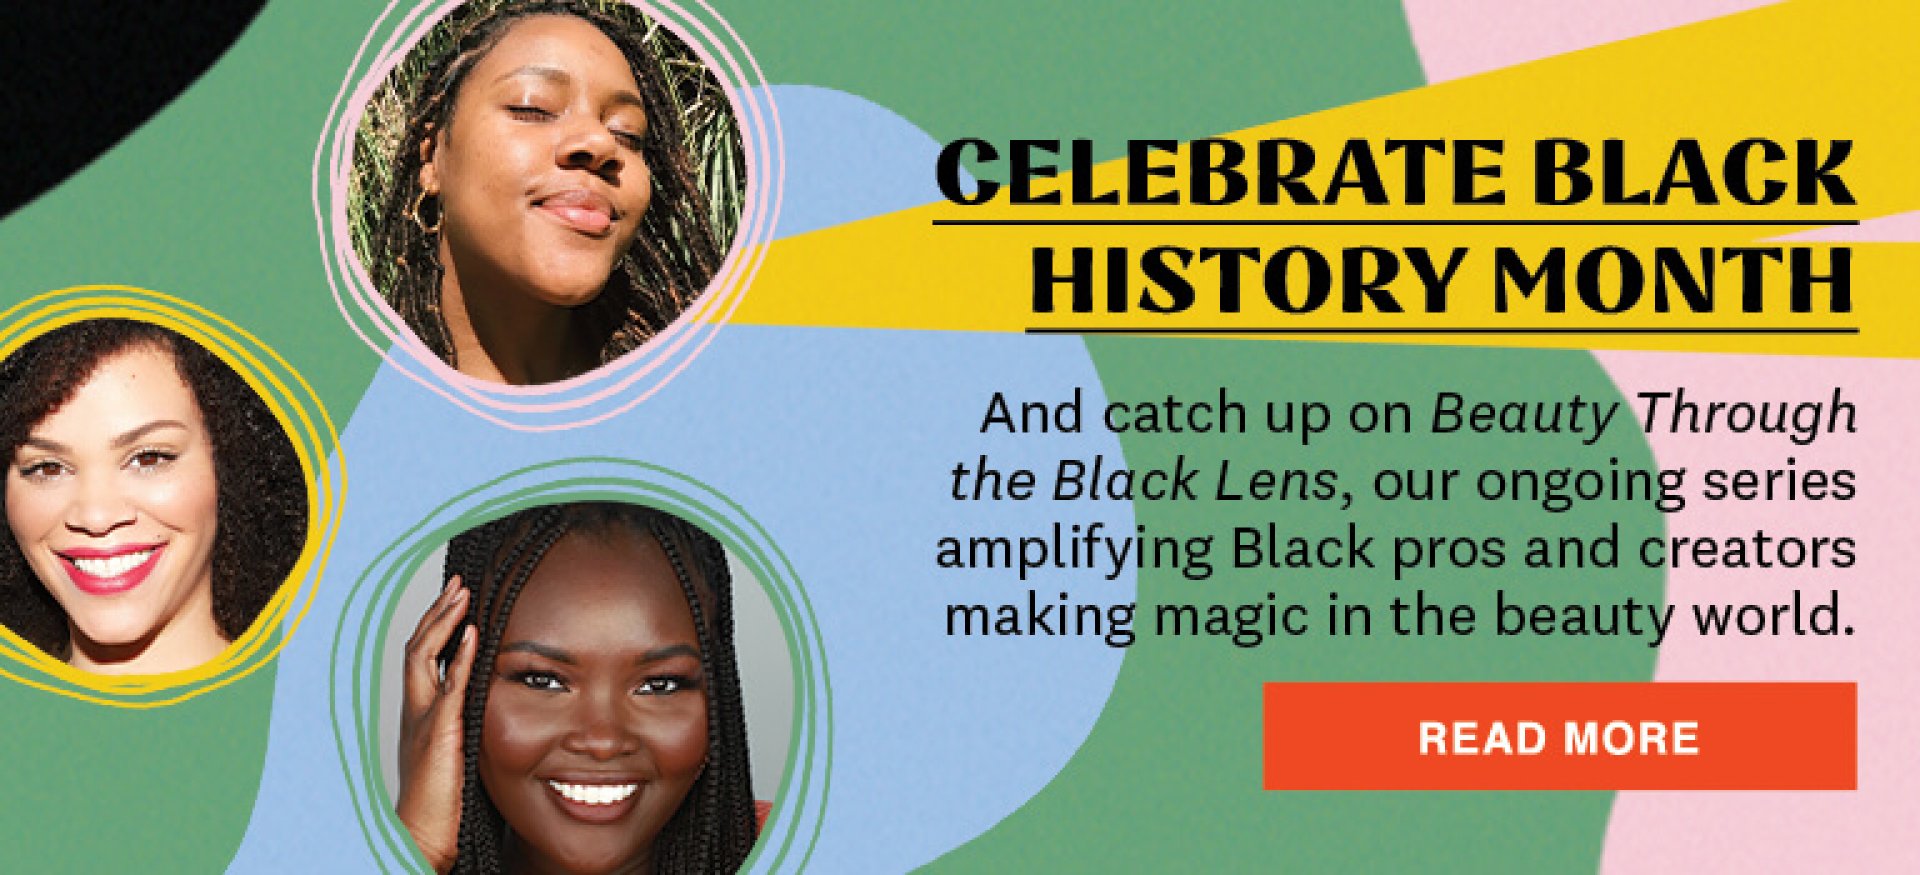 February 2021 Black History Month Sub Banner Mobile